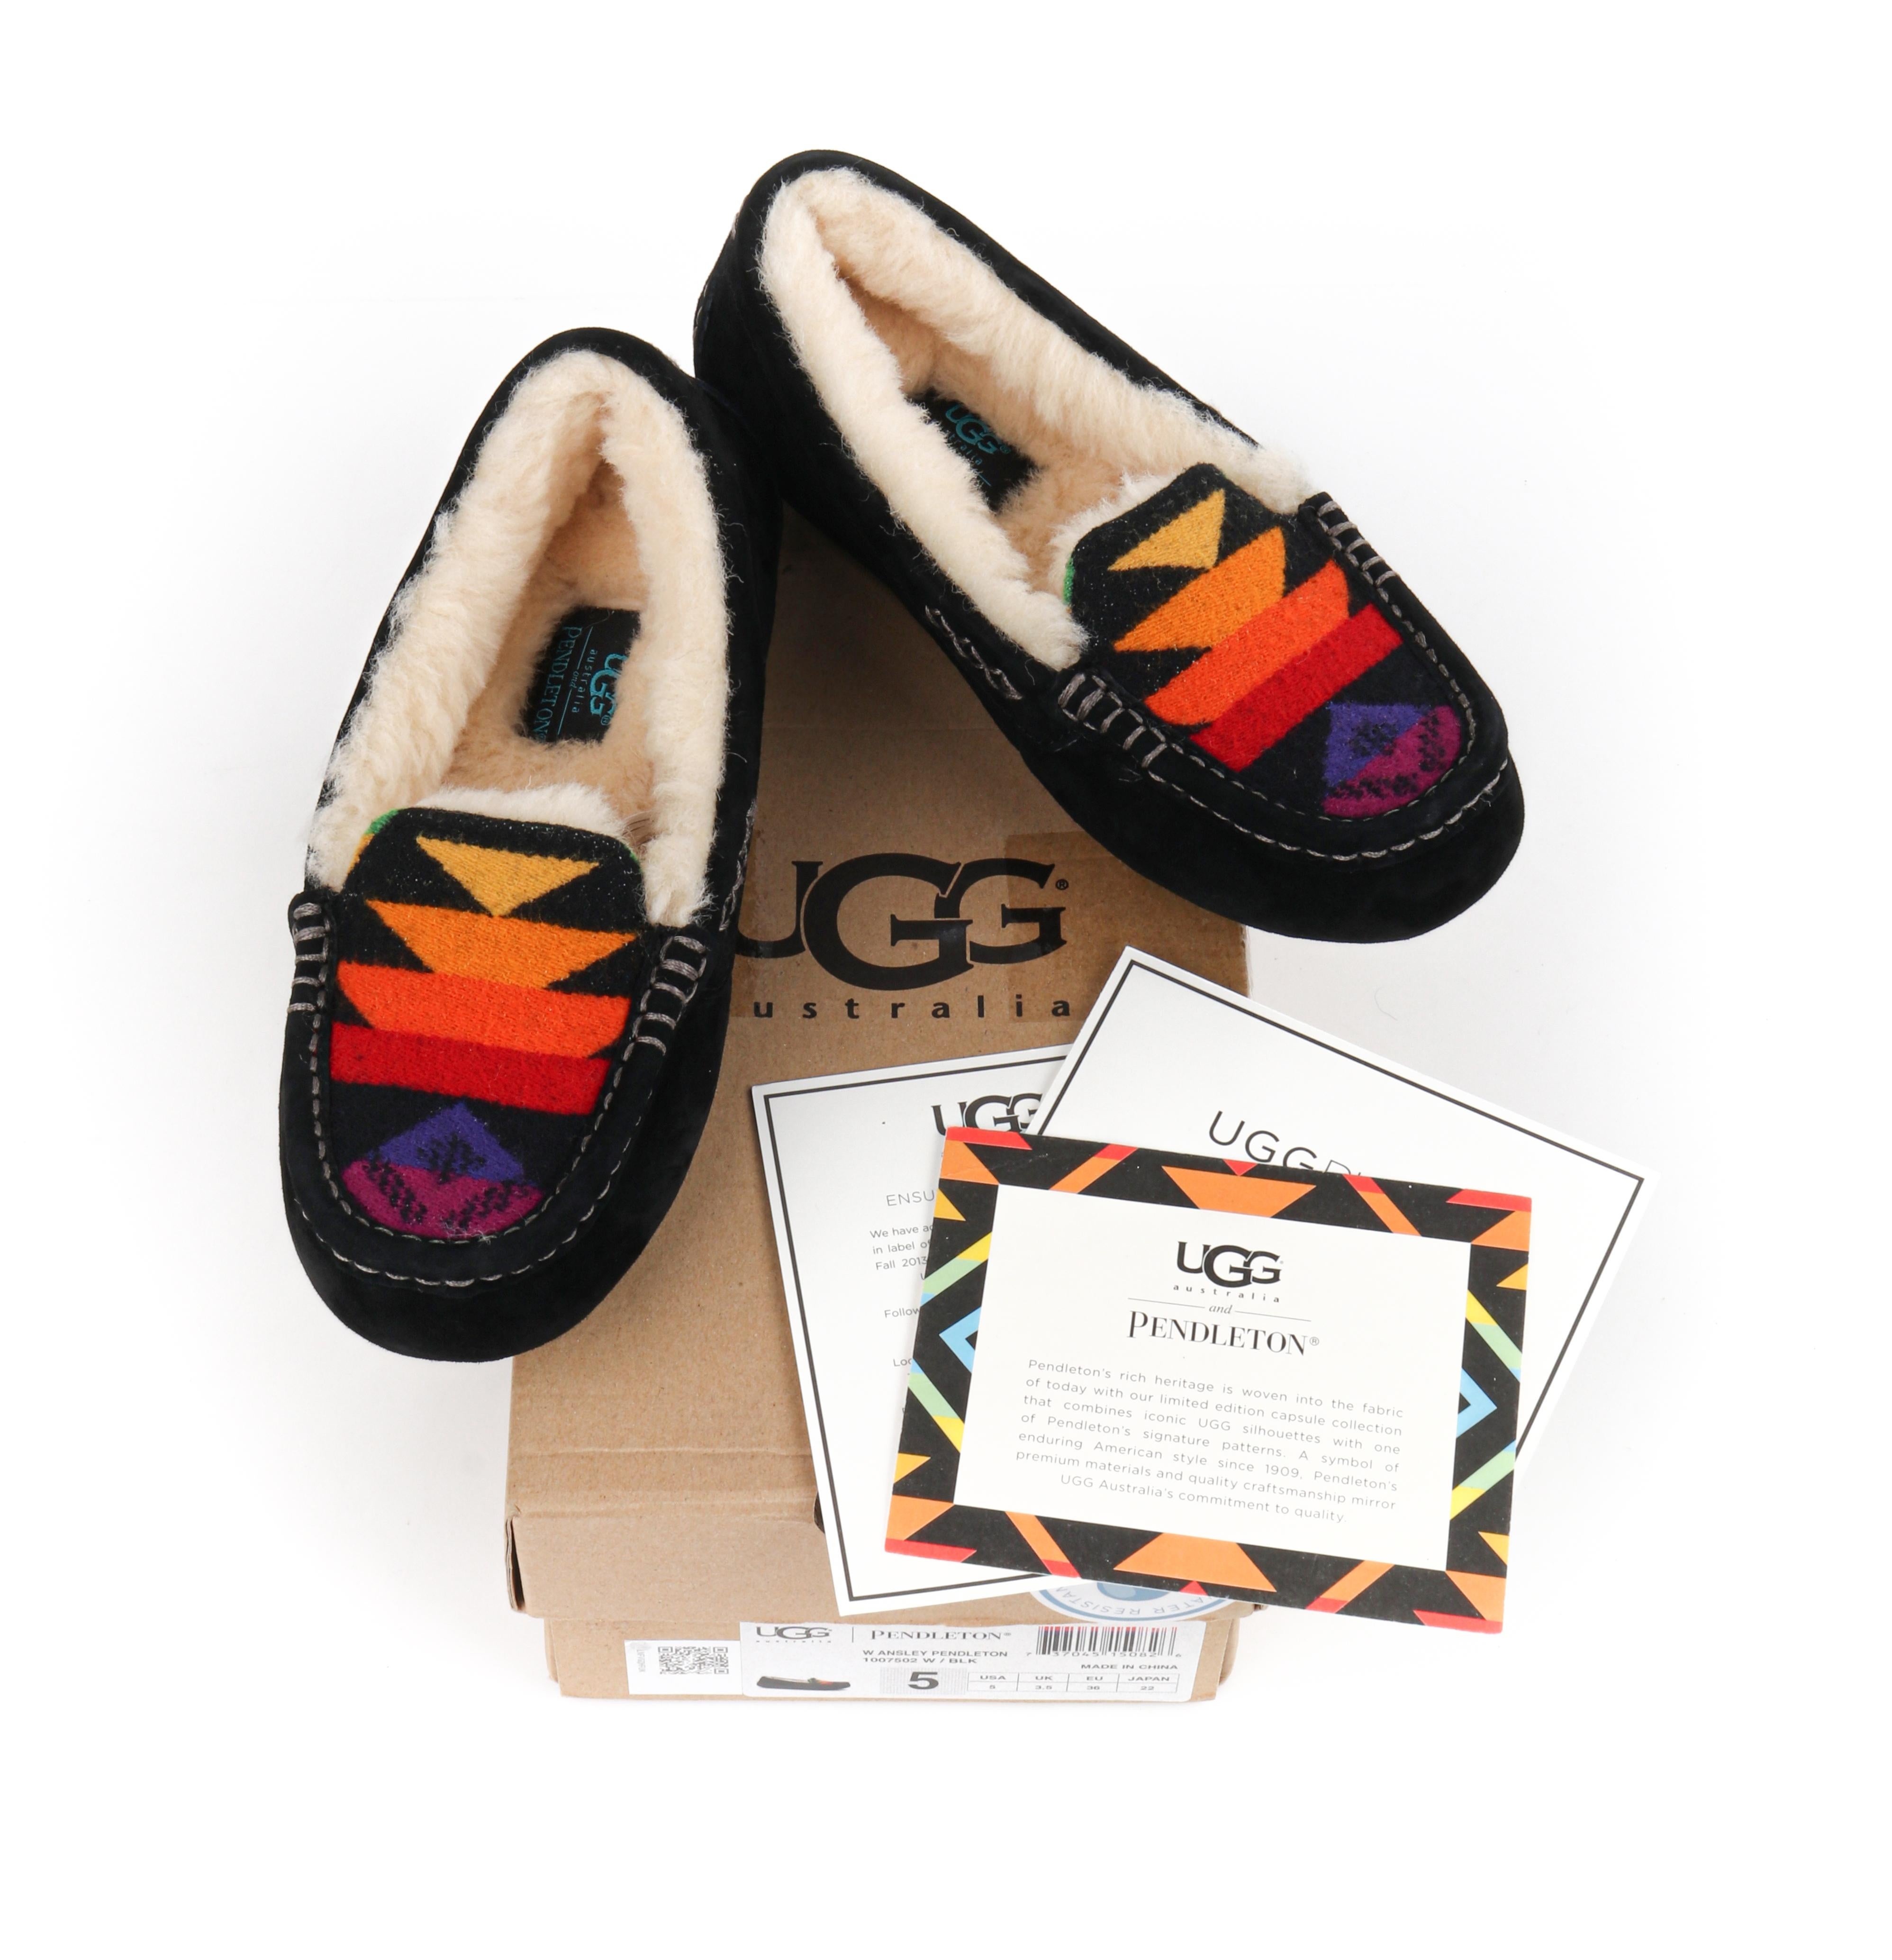 UGG AUSTRALIA Pendleton 2014 Rainbow Black Suede Wool Print Moccasin Slippers
 
Brand / Manufacturer: UGG Australia
Year: 2014
Collection: Pendleton Collaboration
Manufacturer Style Name: Ansley
Style: Moccasin Slipper
Color(s): Shades of tan, grey,